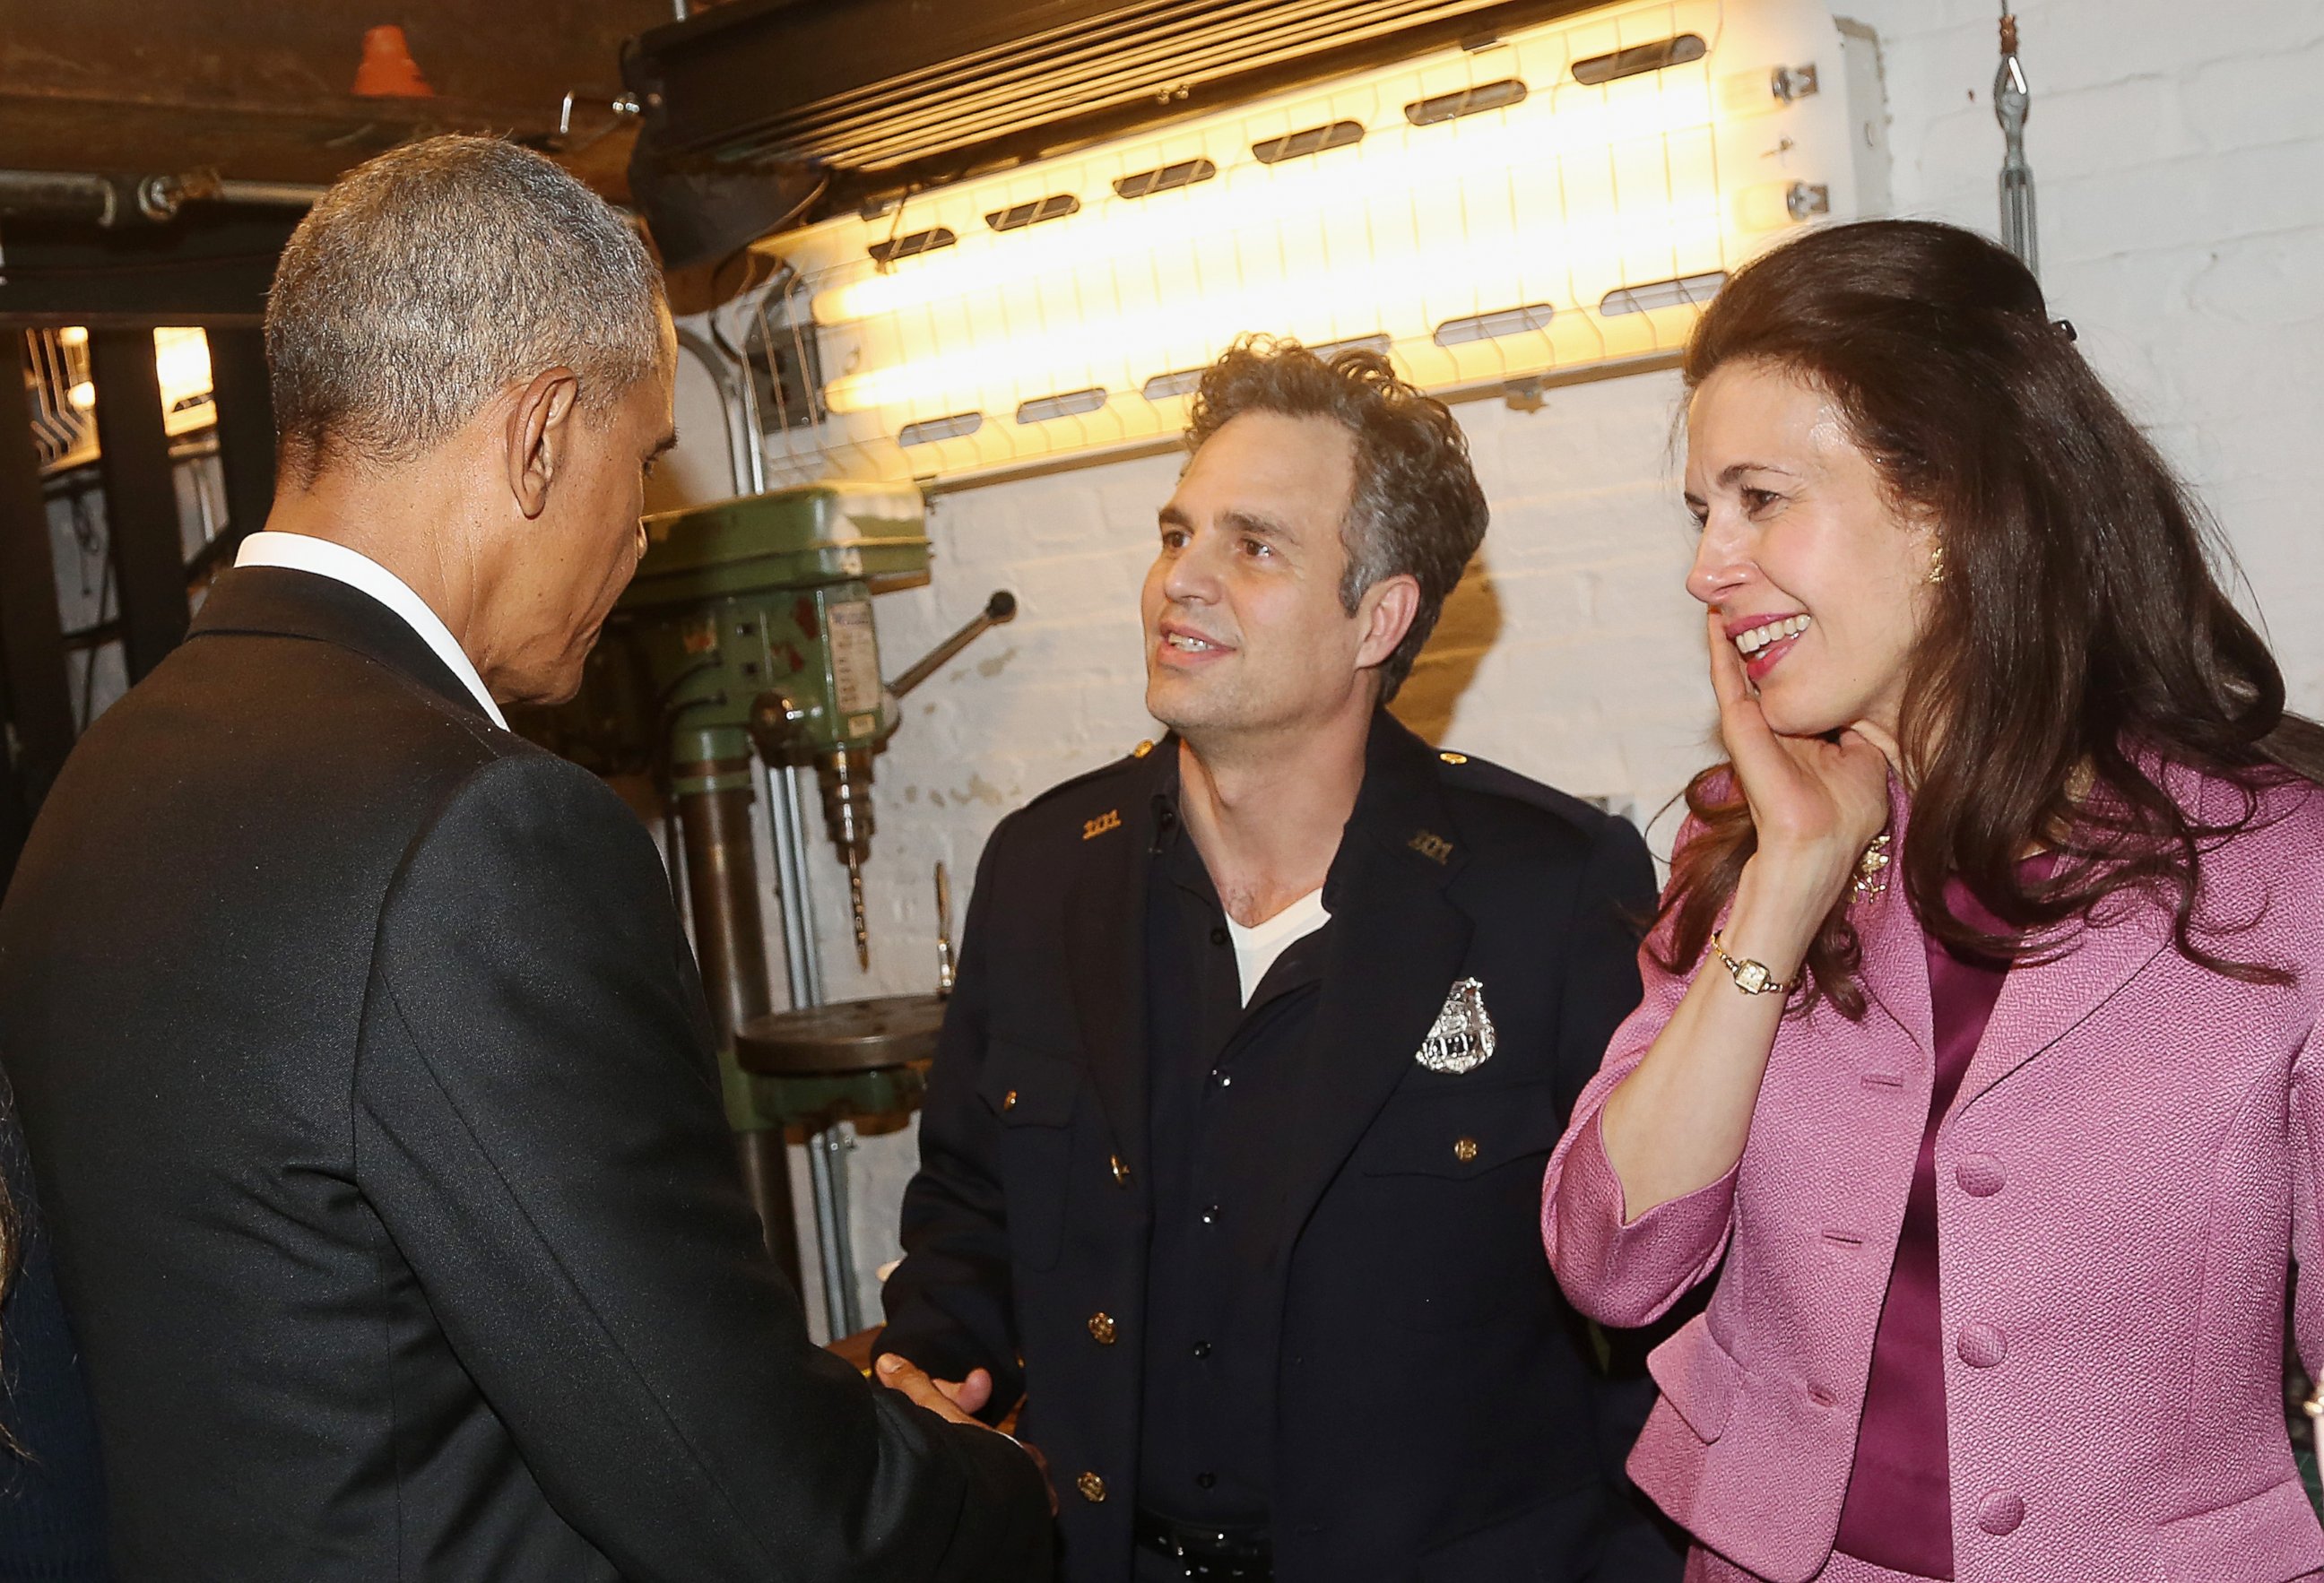 PHOTO: Barack Obama, Mark Ruffalo, and Jessica Hecht chat backstage at The Roundabout Theatre Company's production of "Arthur Miller's The Price" on Broadway at The American Airlines Theatre on February 24, 2017 in New York City.